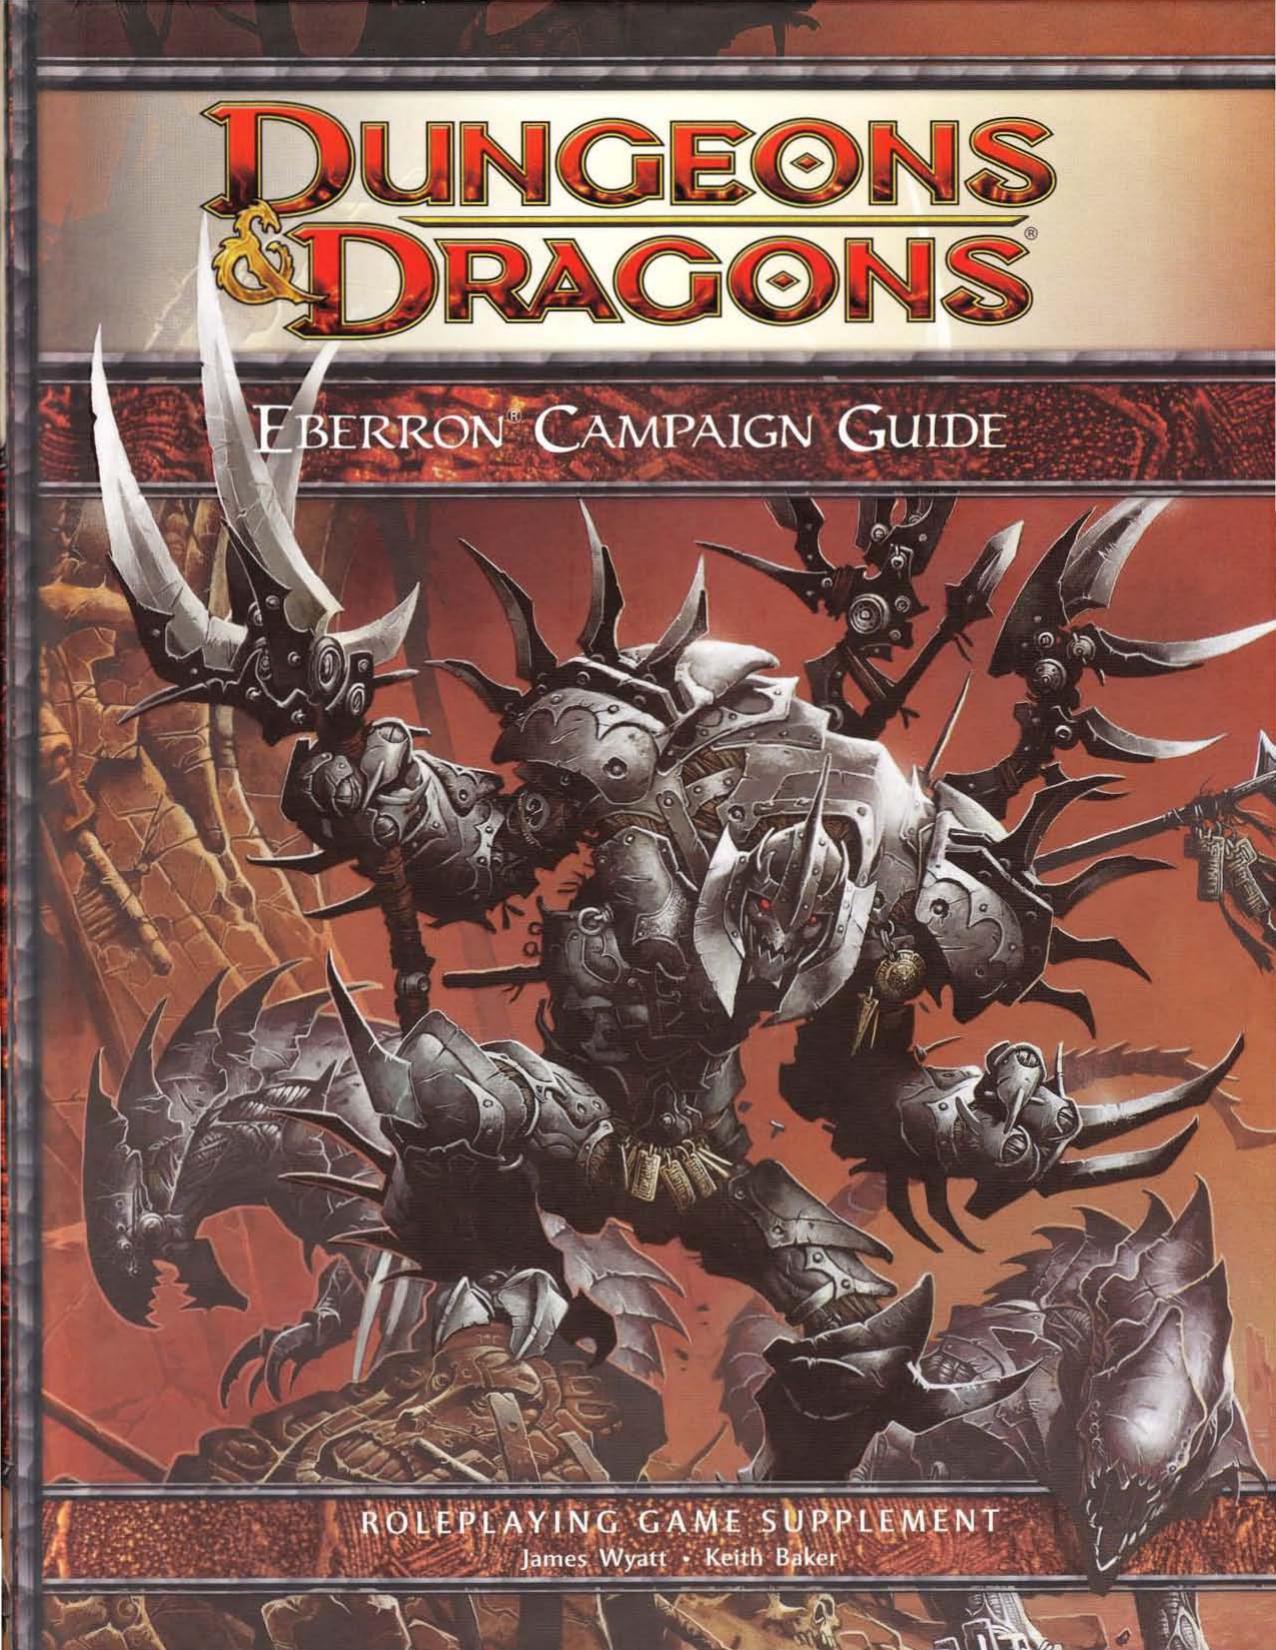 Eberron Campaign Guide: Roleplaying Game Supplement